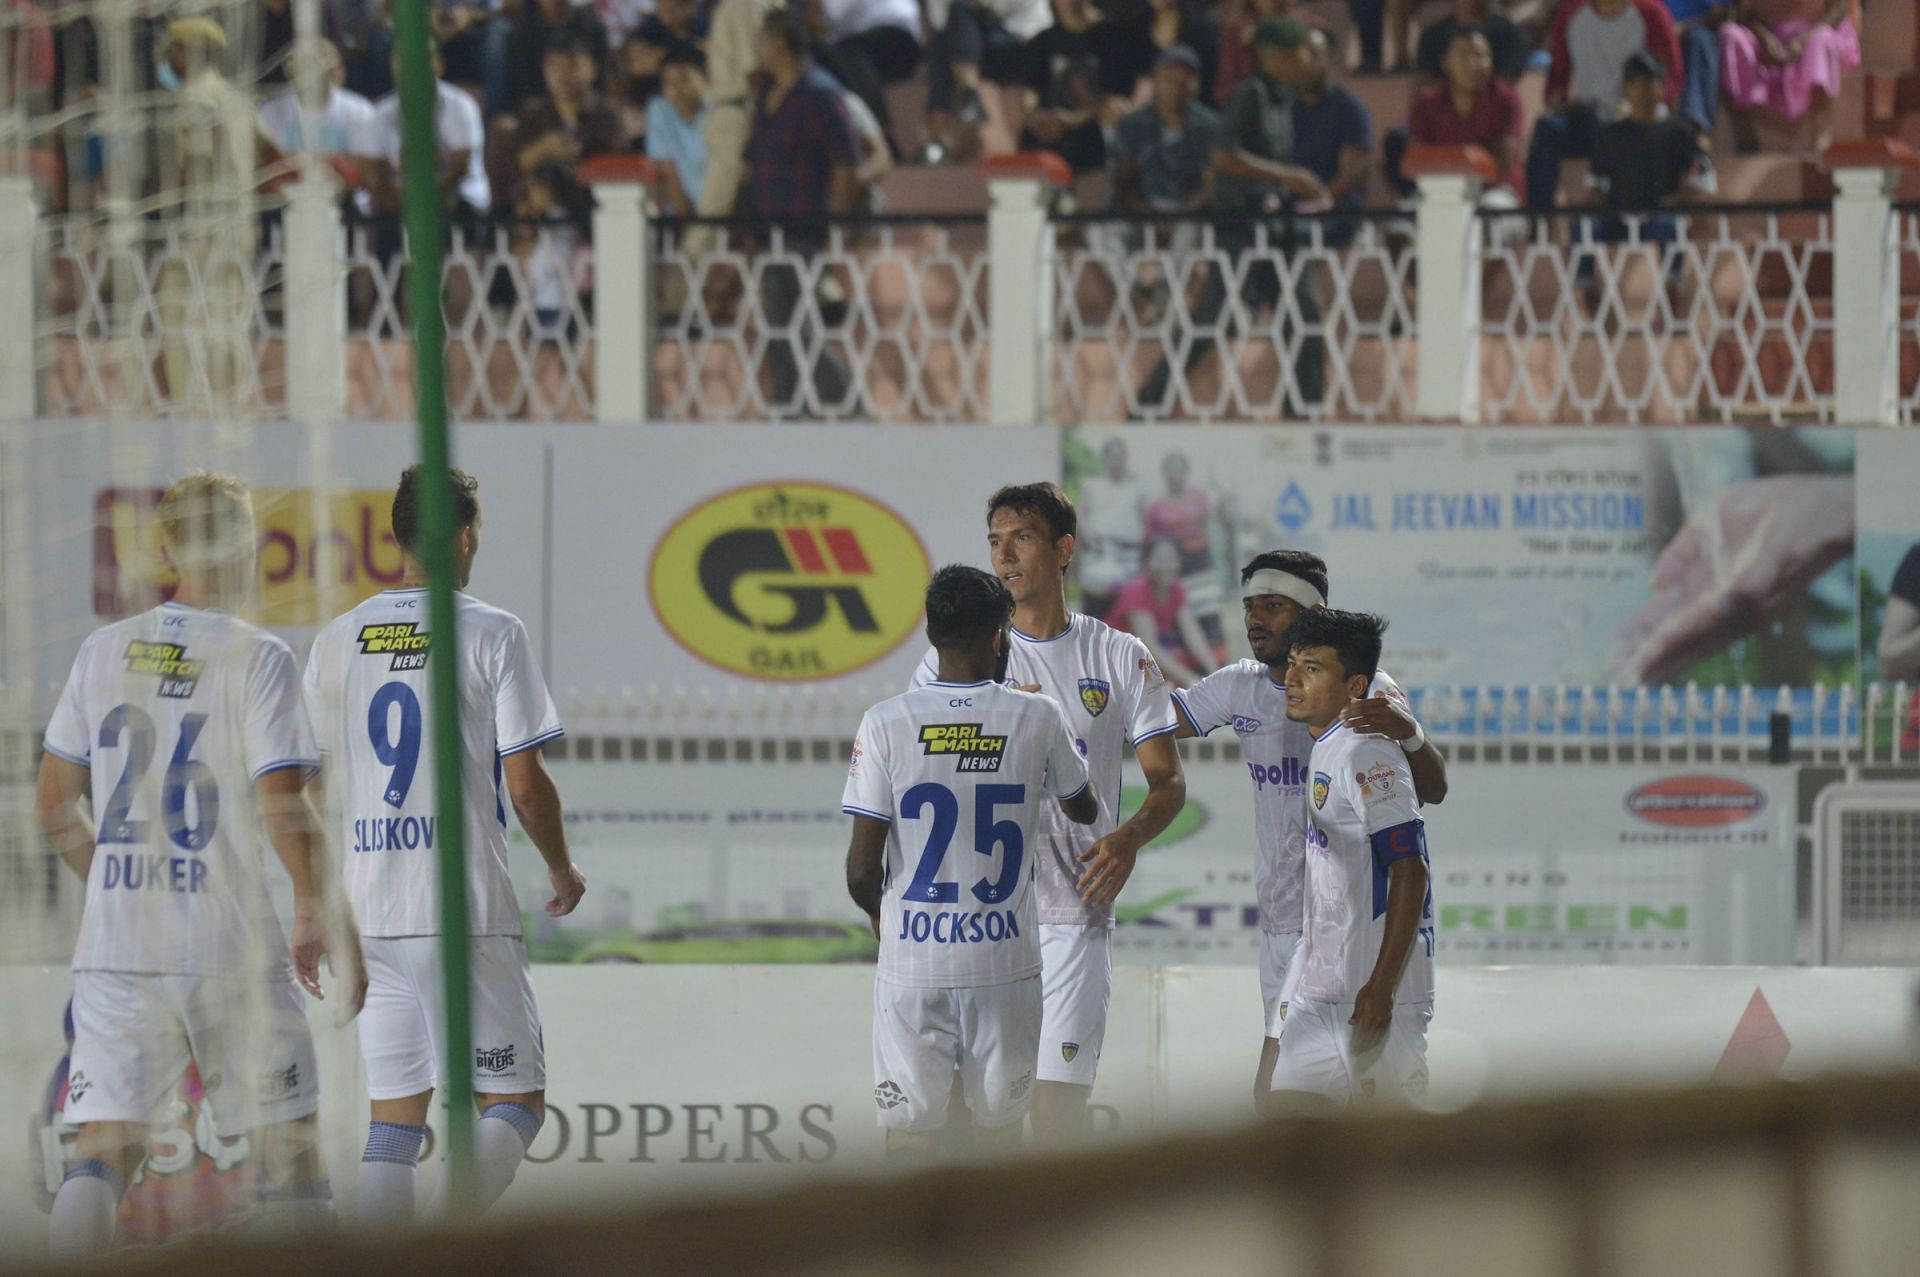 Chennaiyin FC picked up a comfortable win over TRAU FC. [Credits: Suman Chattopadhyay / www.imagesolutionr.in]